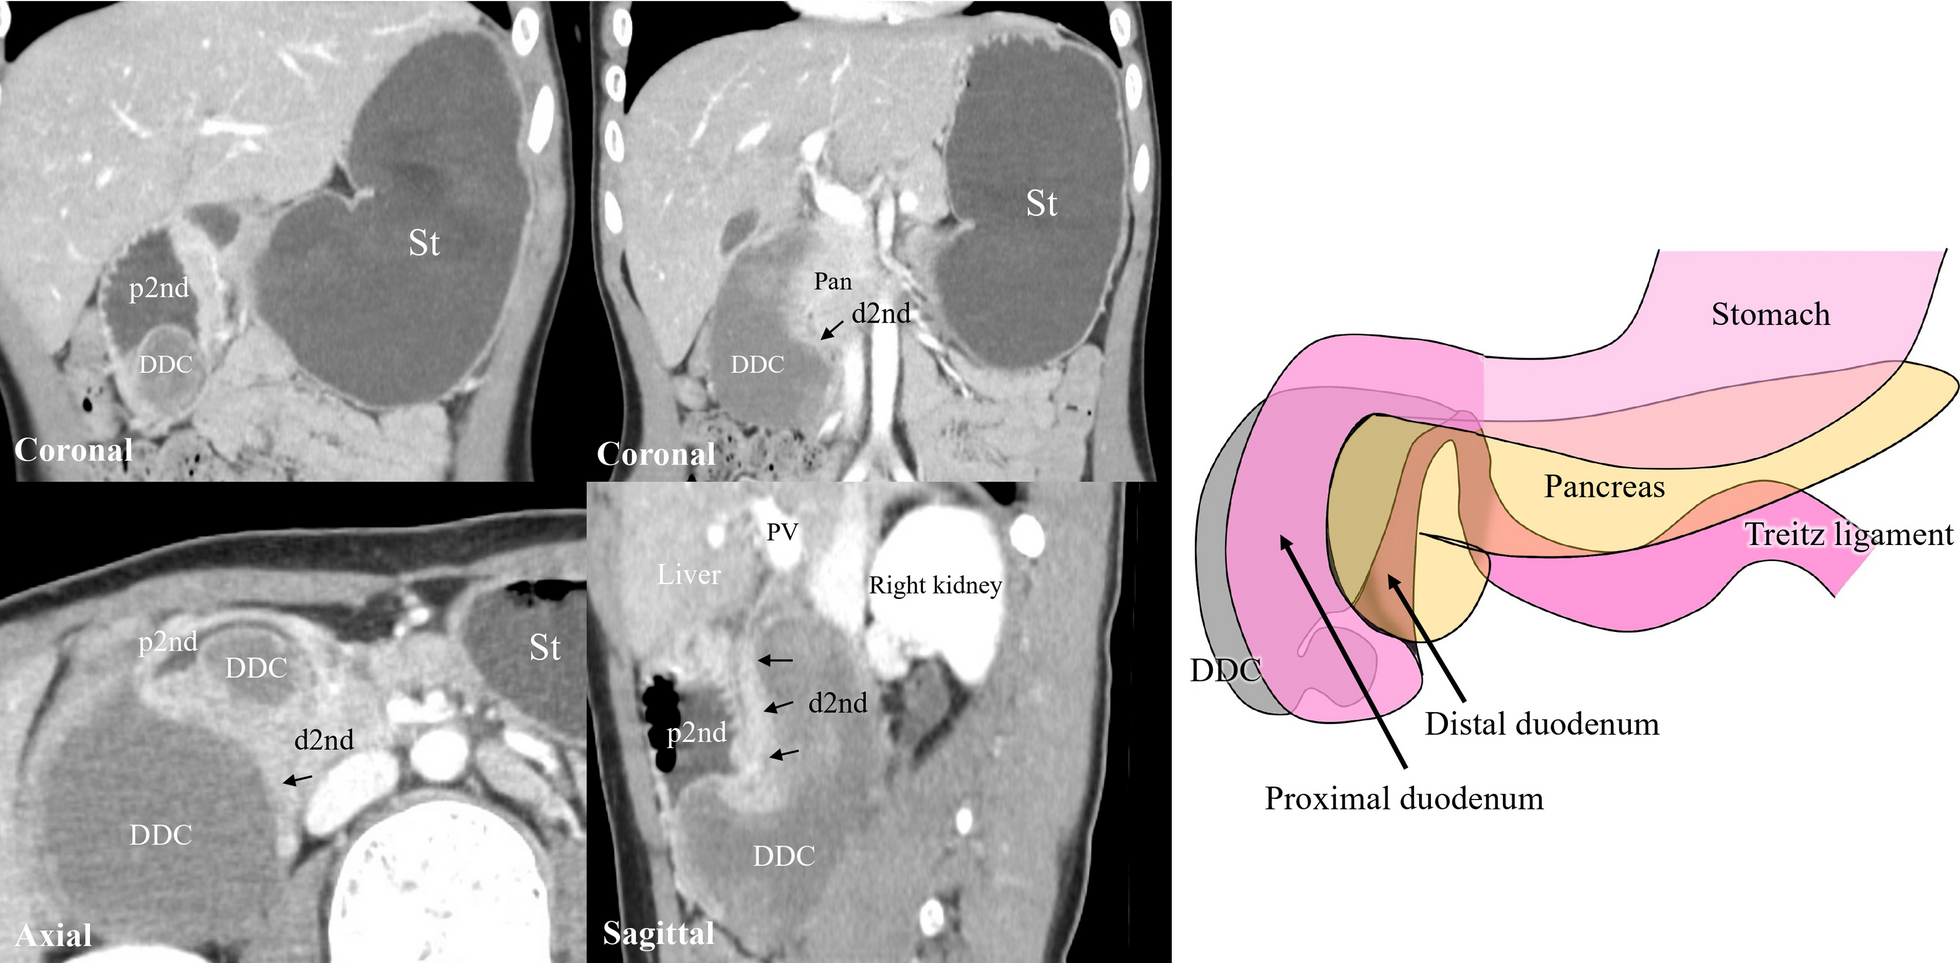 Duodenal duplication cyst at the second part of the duodenum with congenital duodenal position anomaly completely resected by laparoscopic partial duodenectomy: a case report